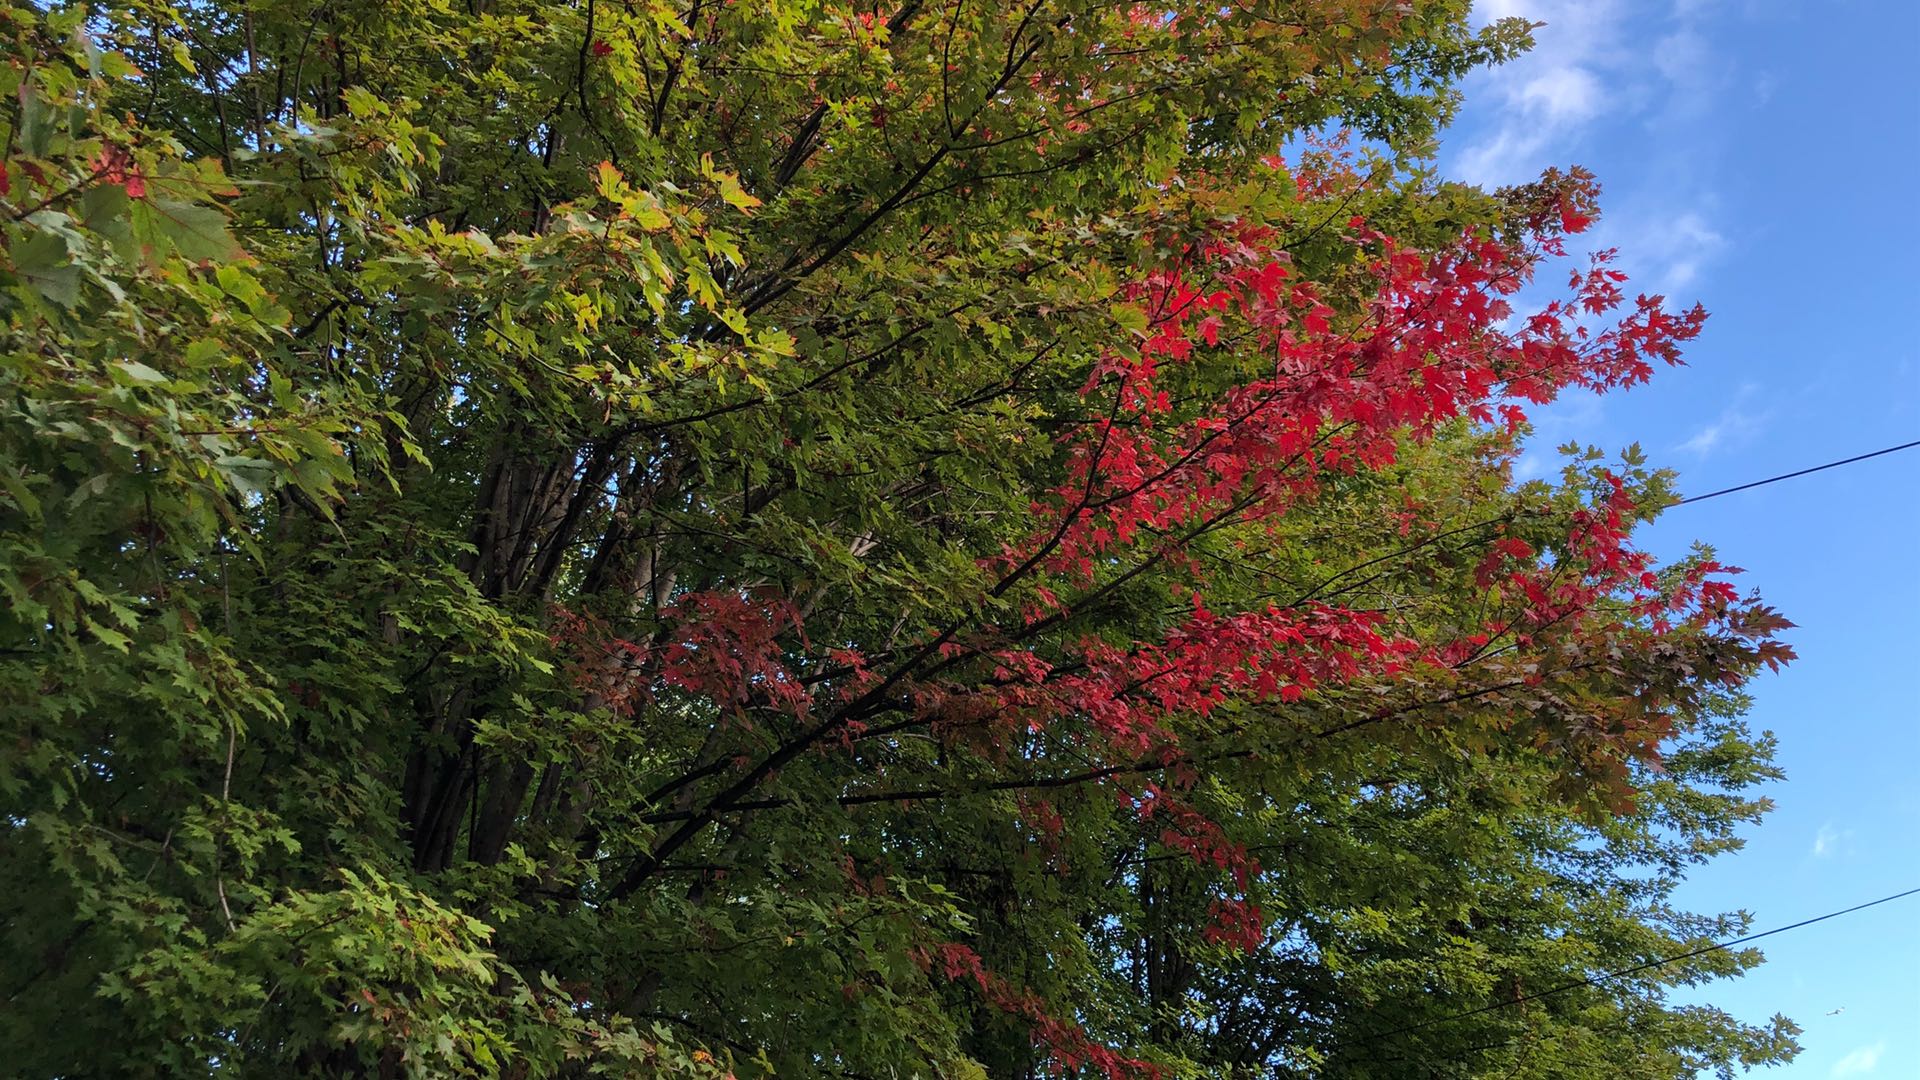 Fall color varies from tree to tree, and even branch to branch. (Patty Wetli / WTTW News)